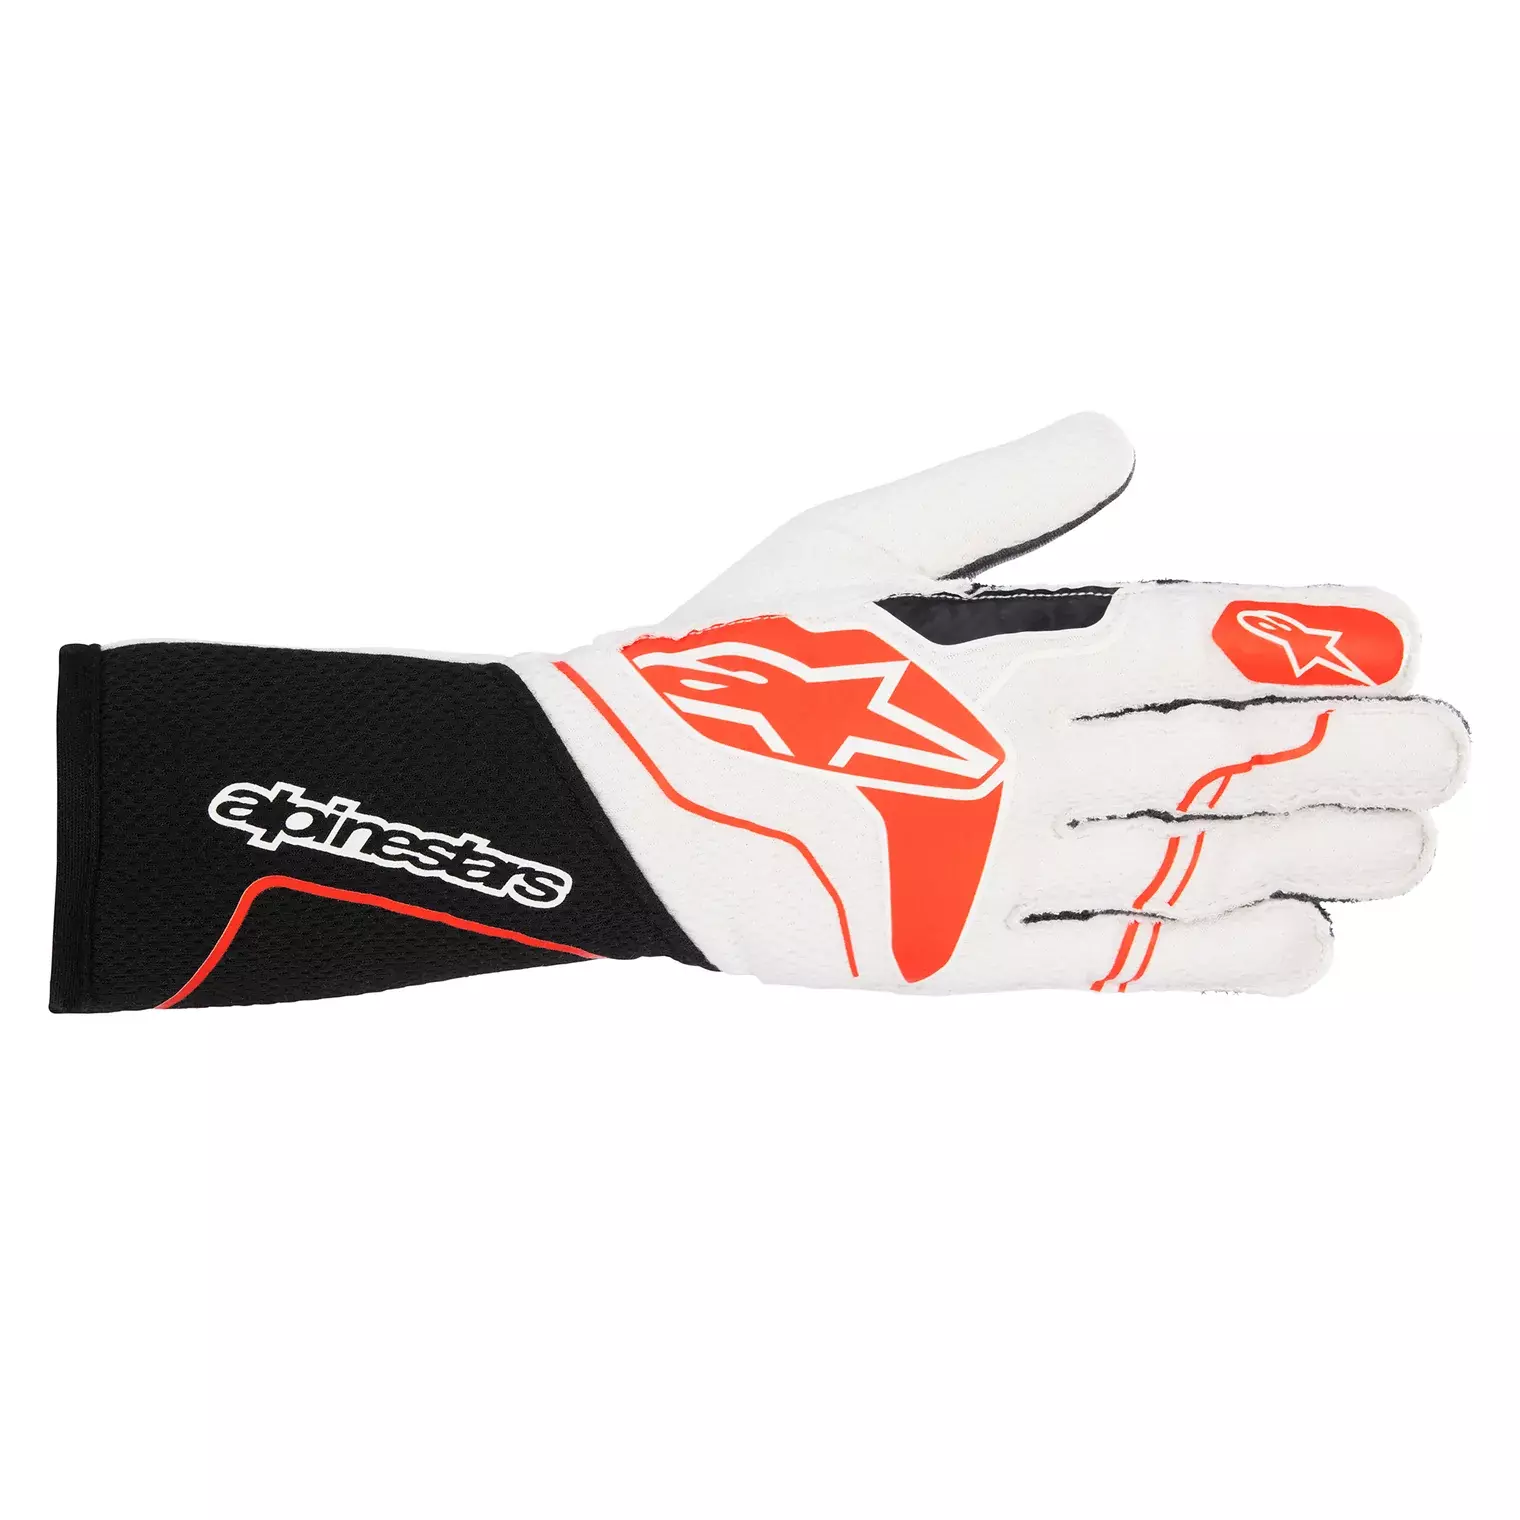 Alpinestars 3550323-123-L Driving Gloves, Tech 1-ZX, SFI 3.3/5, FIA Approved, 2 Layer, Fire Retardant Fabric, Elastic Cuff, White / Red, Large, Pair